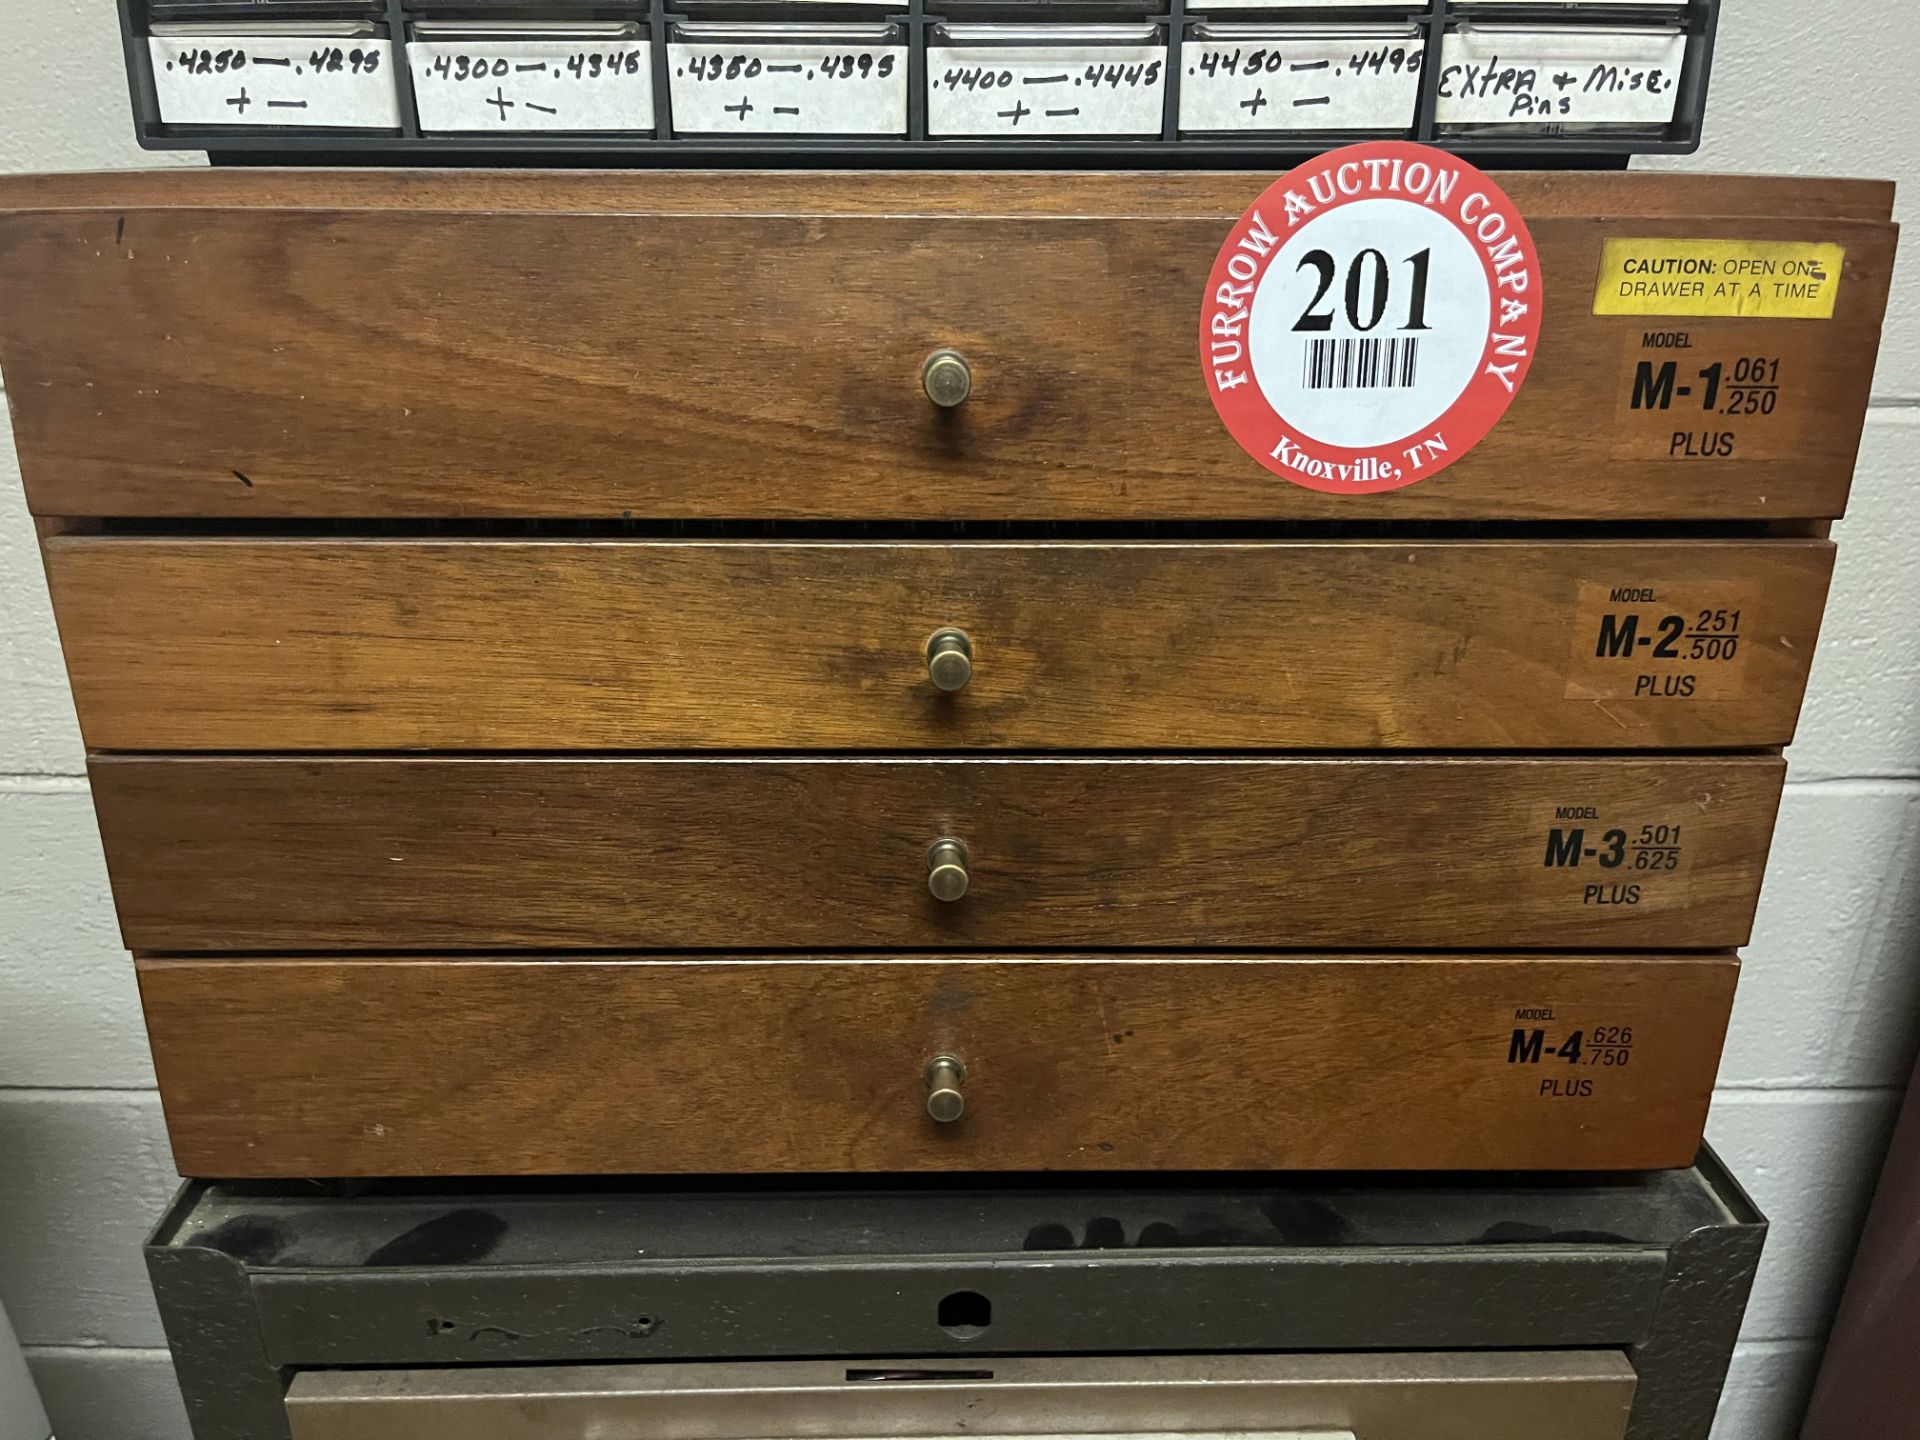 Set of Pin Gauges in 4-Drawer Wooden Cabinet From .051 to .750